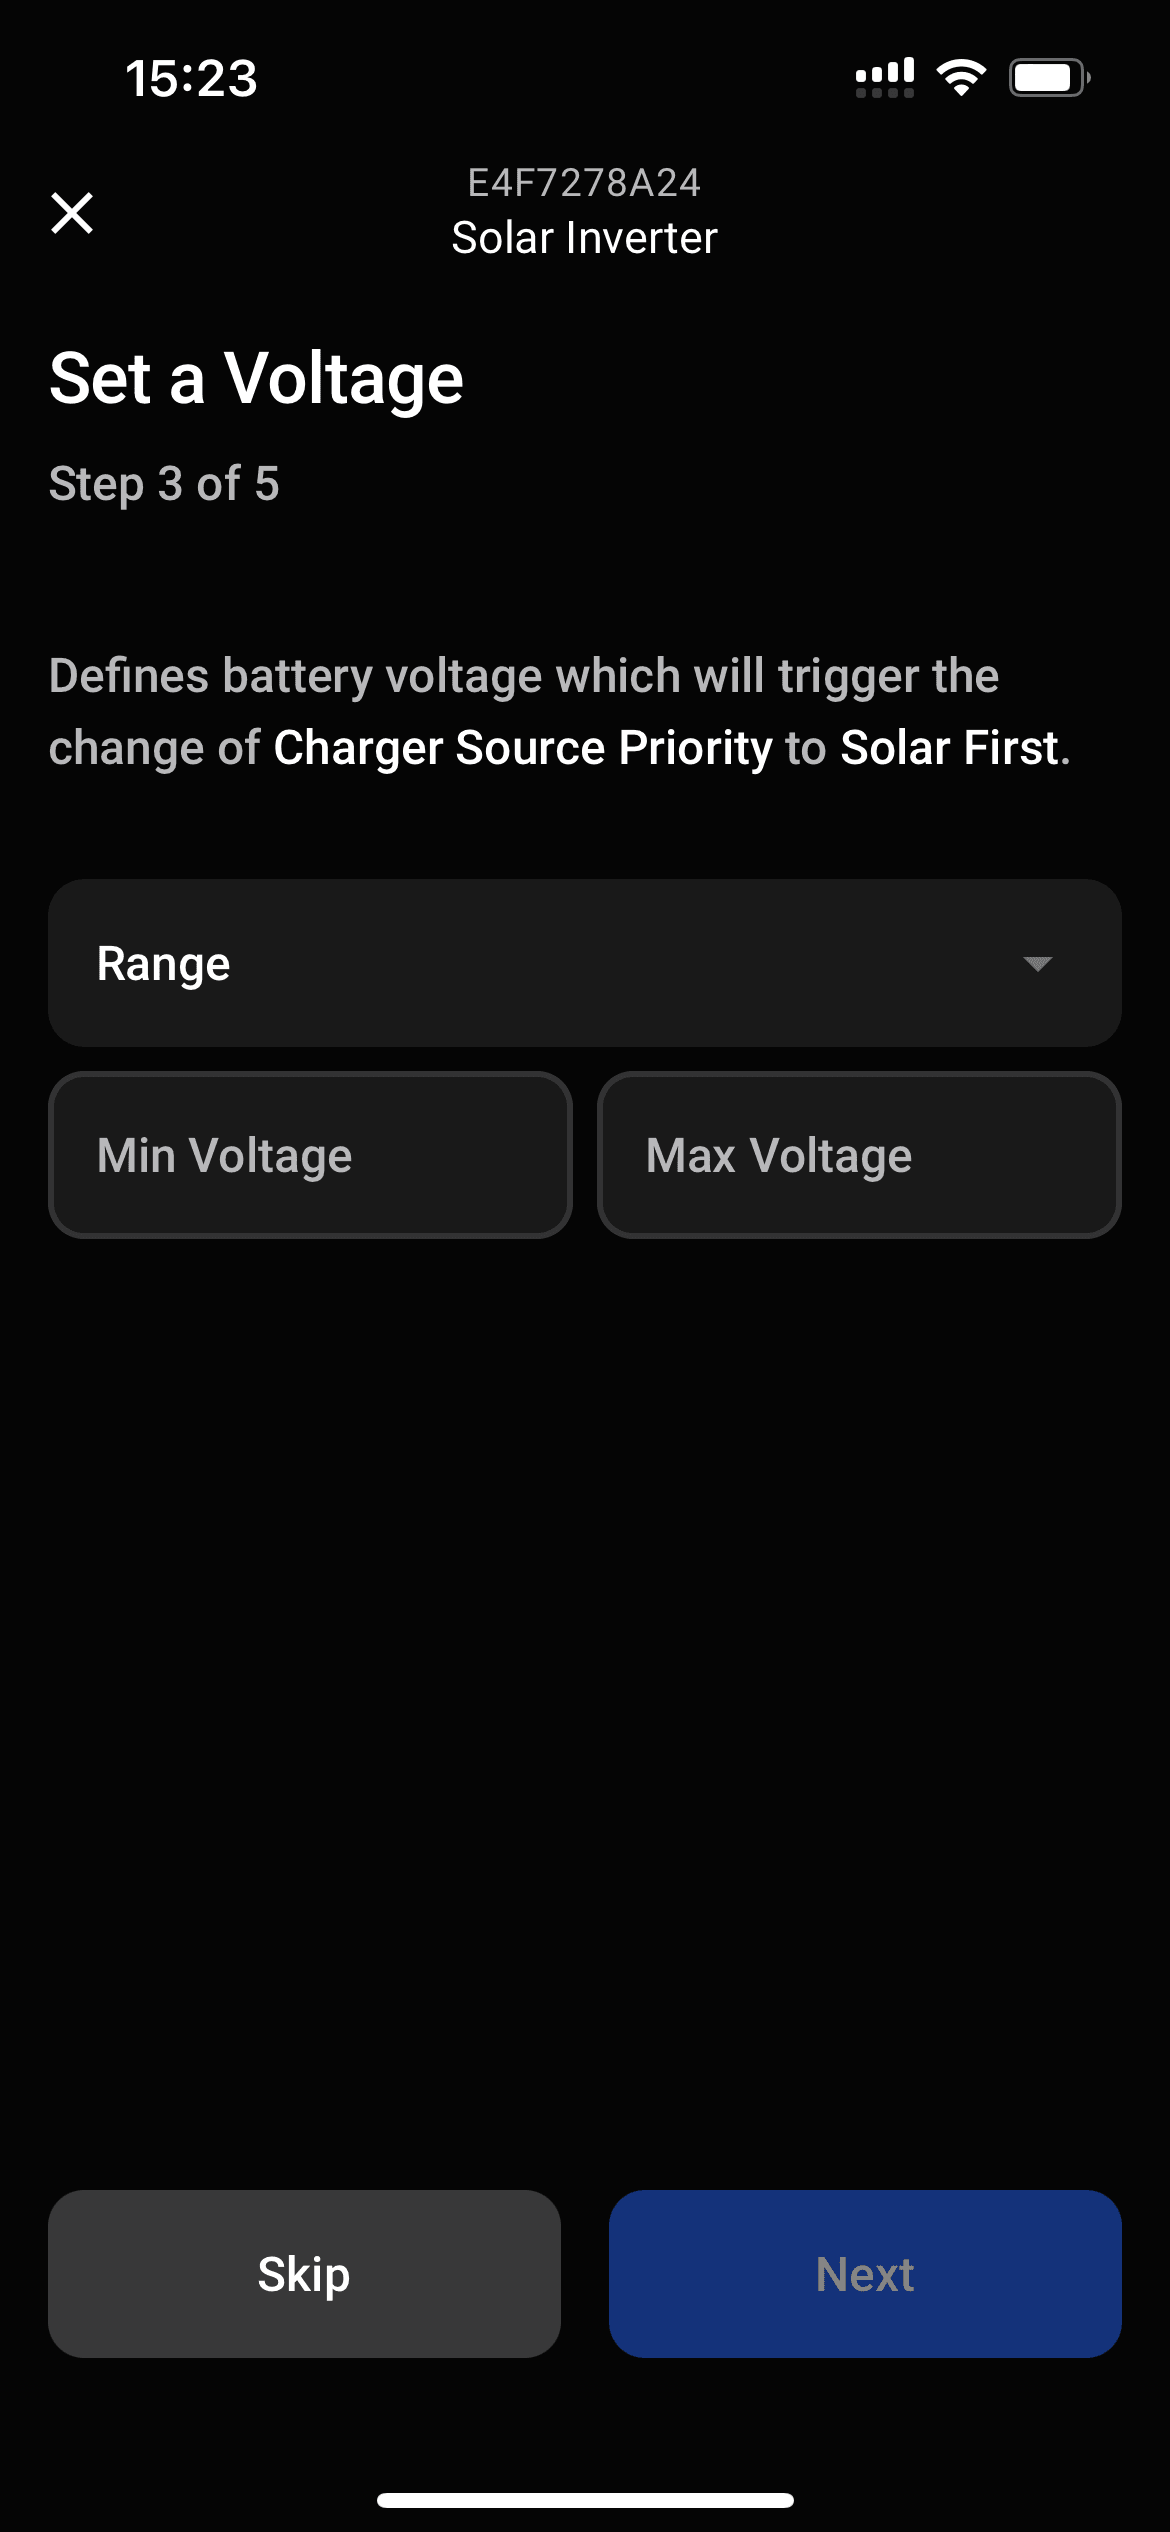 Set desired battery voltage range that will trigger the rule